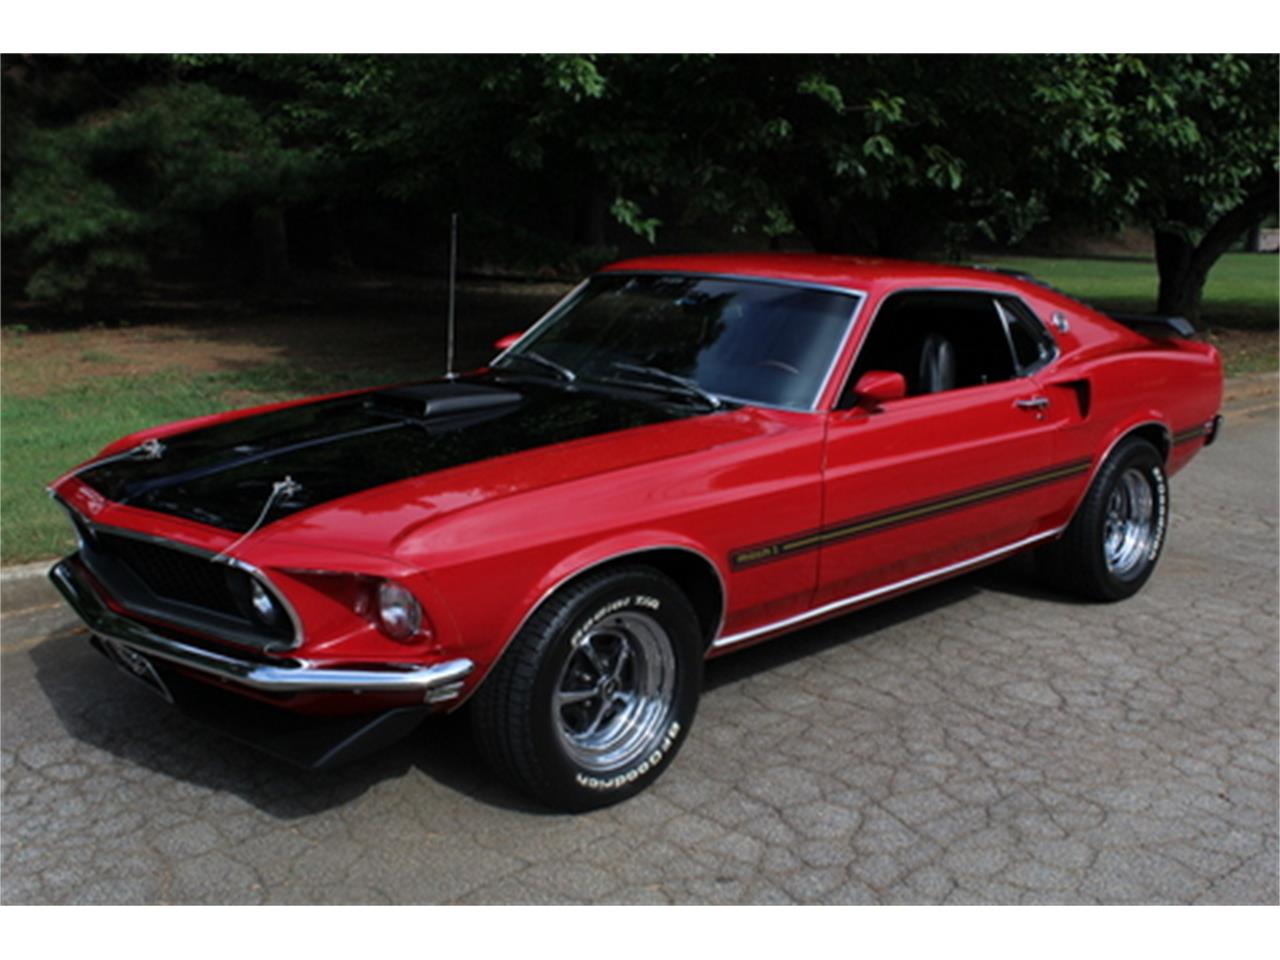 1969 Ford Mustang Mach 1 for Sale | ClassicCars.com | CC-1143083